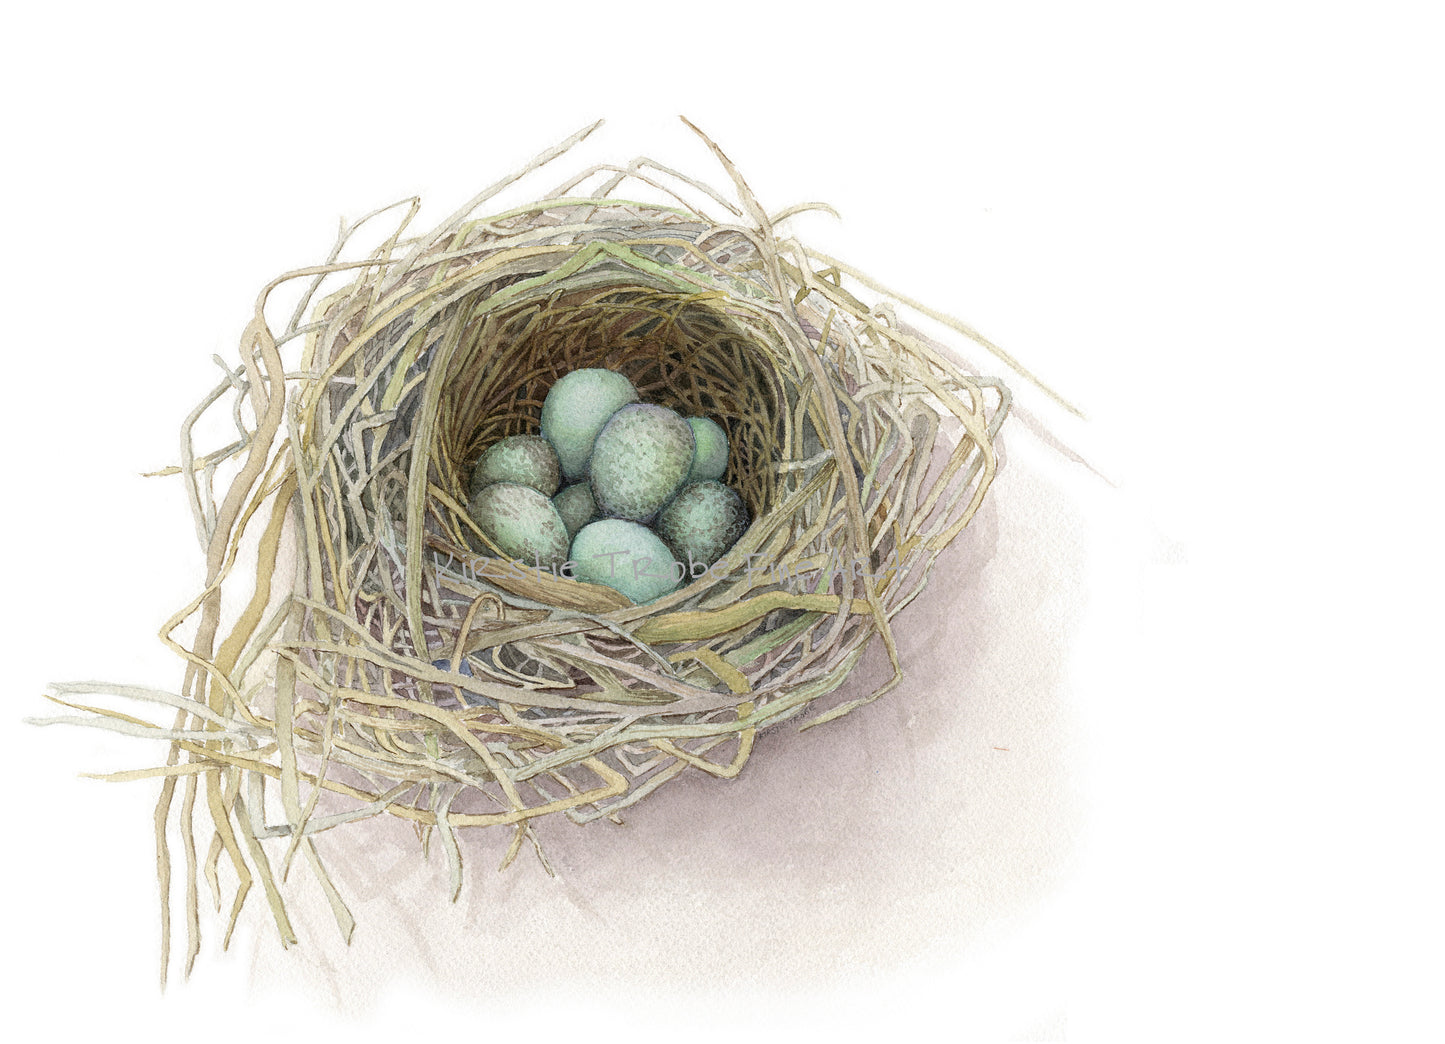 A nest holding a clutch of blue green Blackbirds eggs contrasts with the subtle taupes and beiges of the twigs surrounding them.  The nest is positioned in the bottom left hand corner of the picture against a white background.